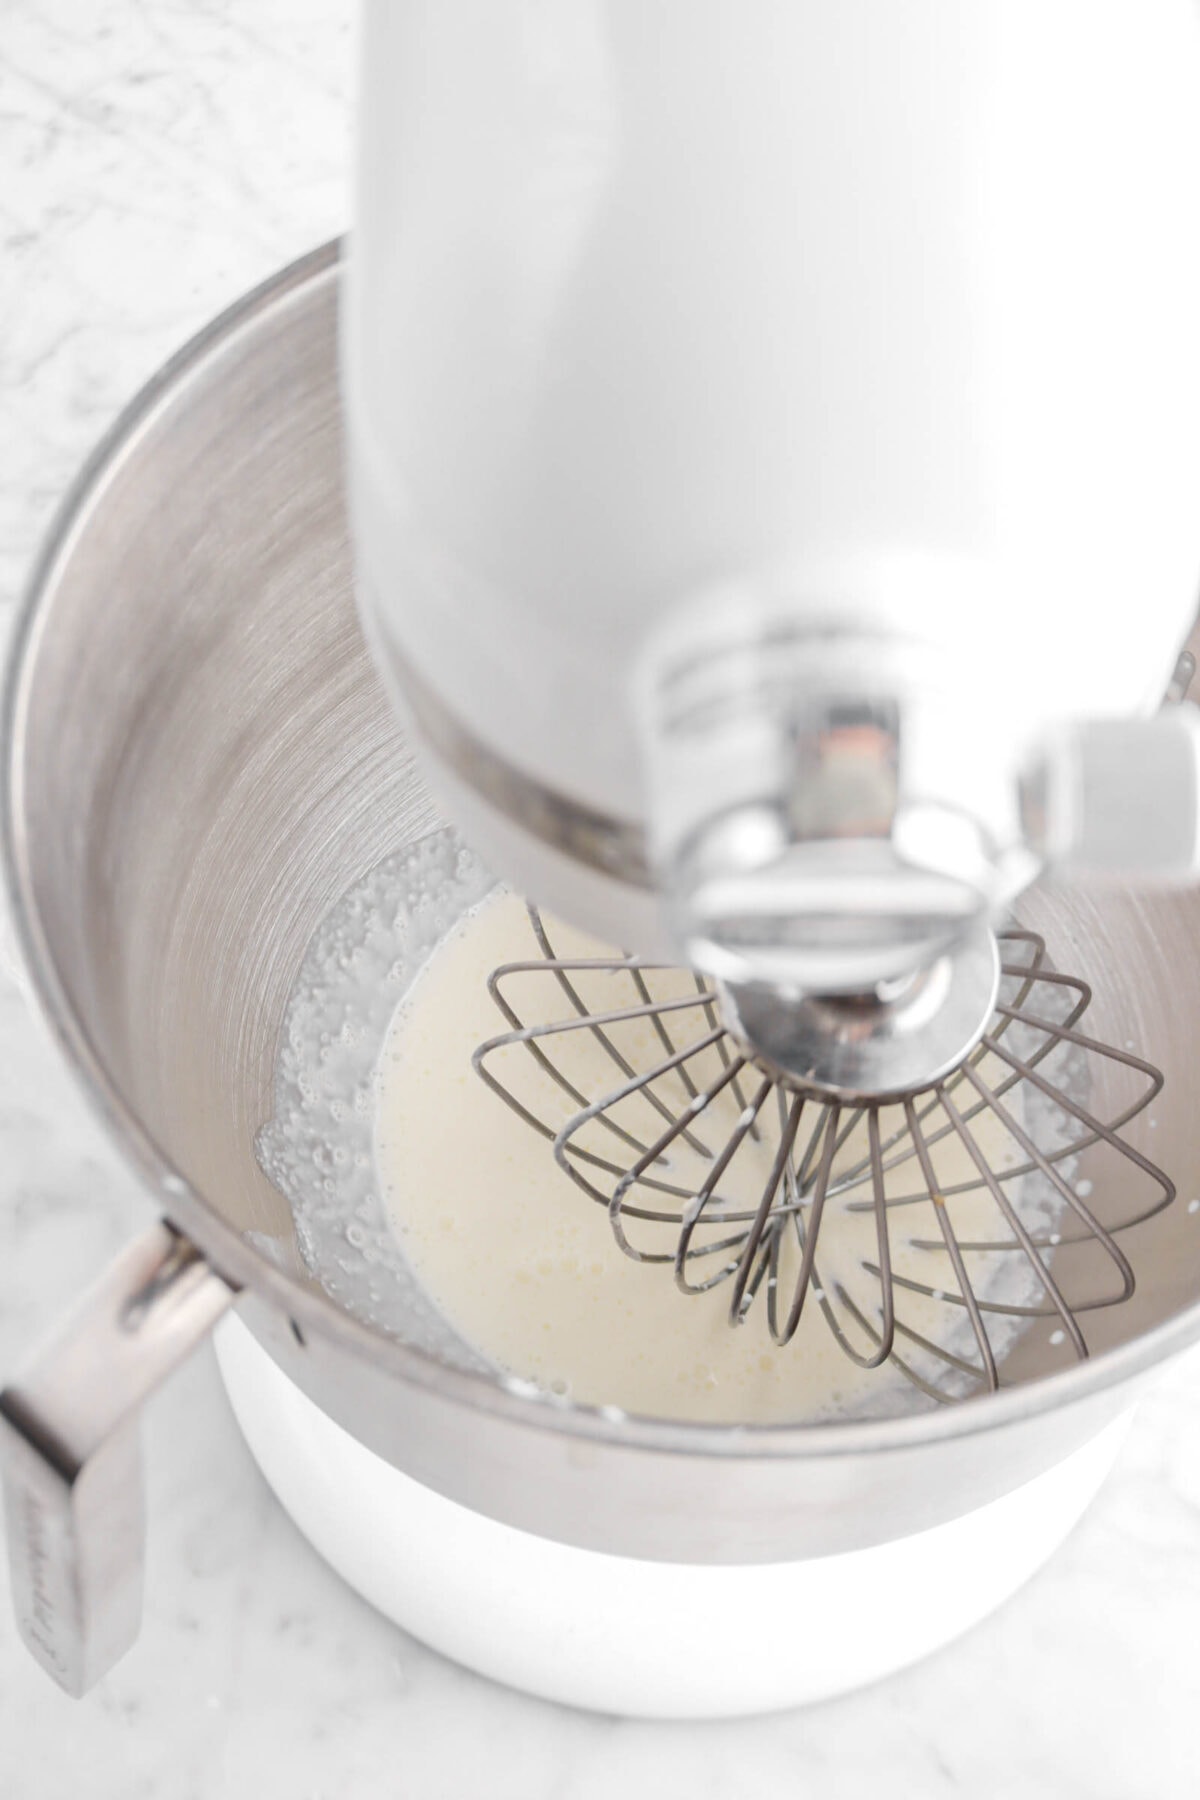 heavy cream in stand mixer bowl